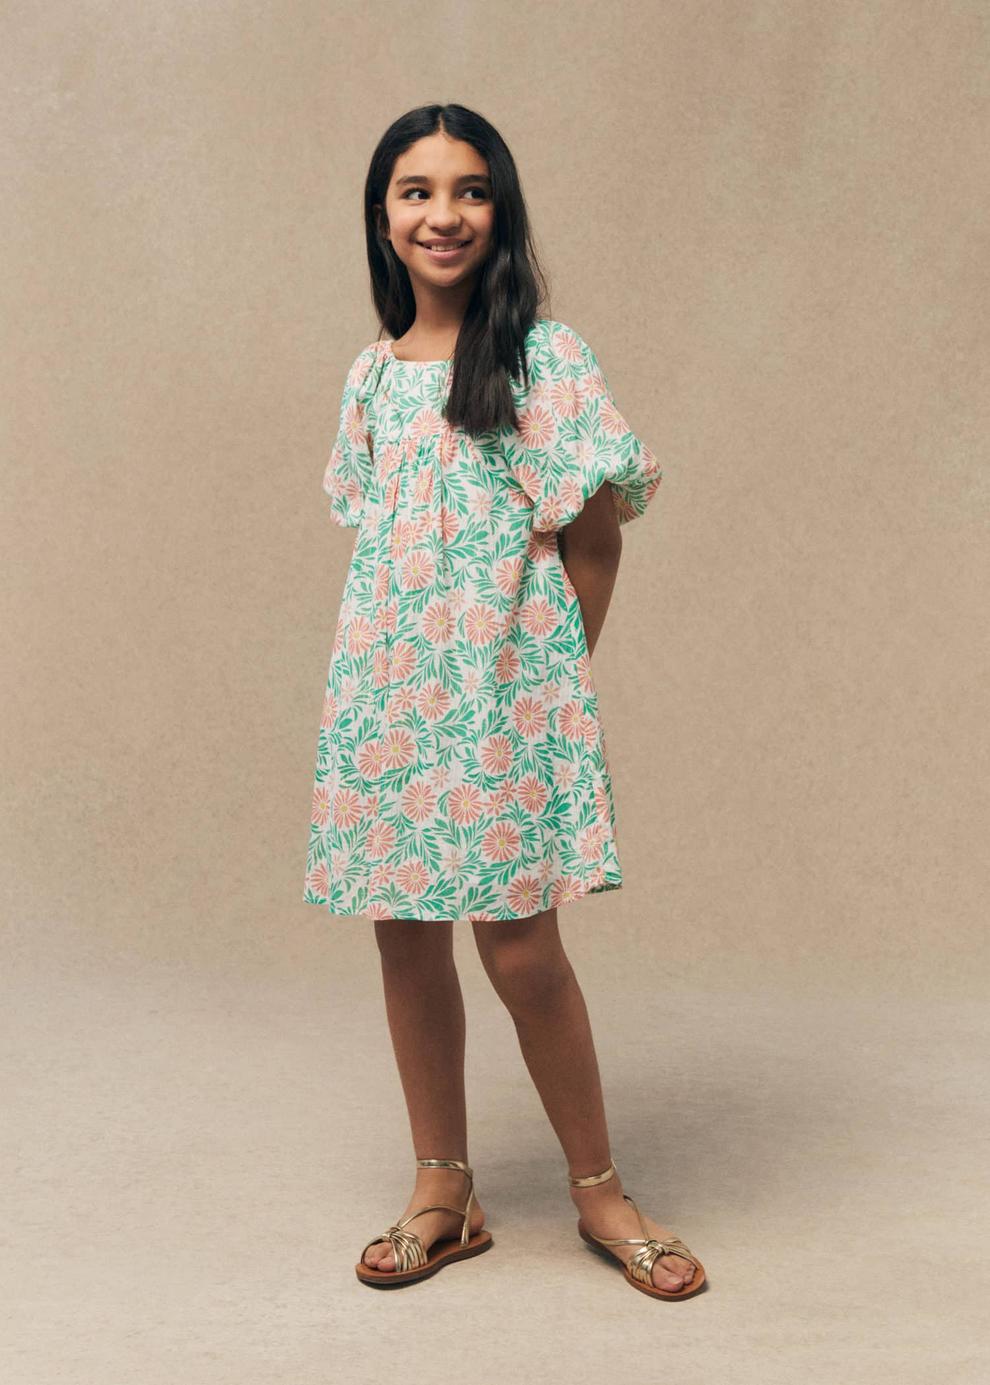 Printed cotton dress offers at S$ 59.9 in Mango Kids